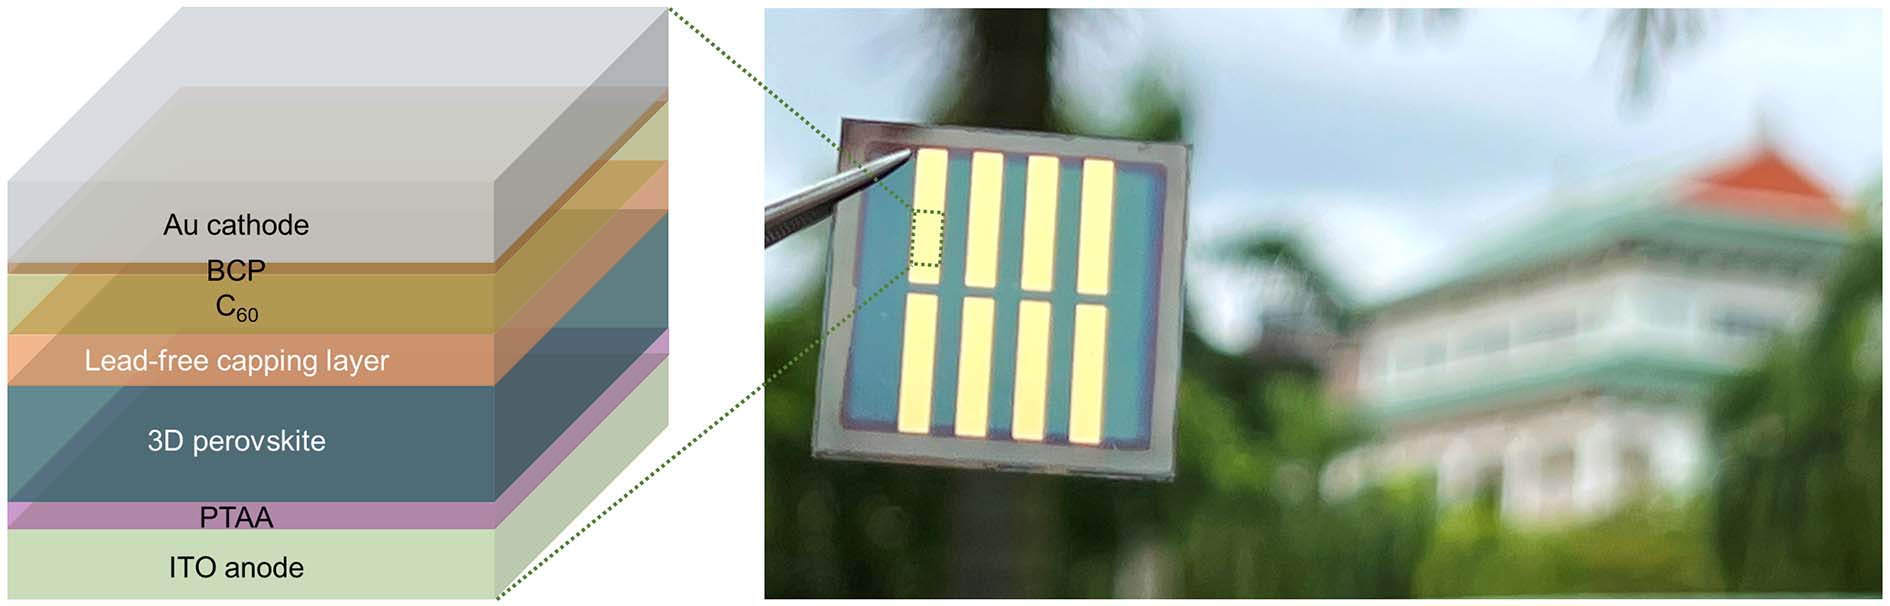 Prototype perovskite solar panel capped with the zinc-based compound